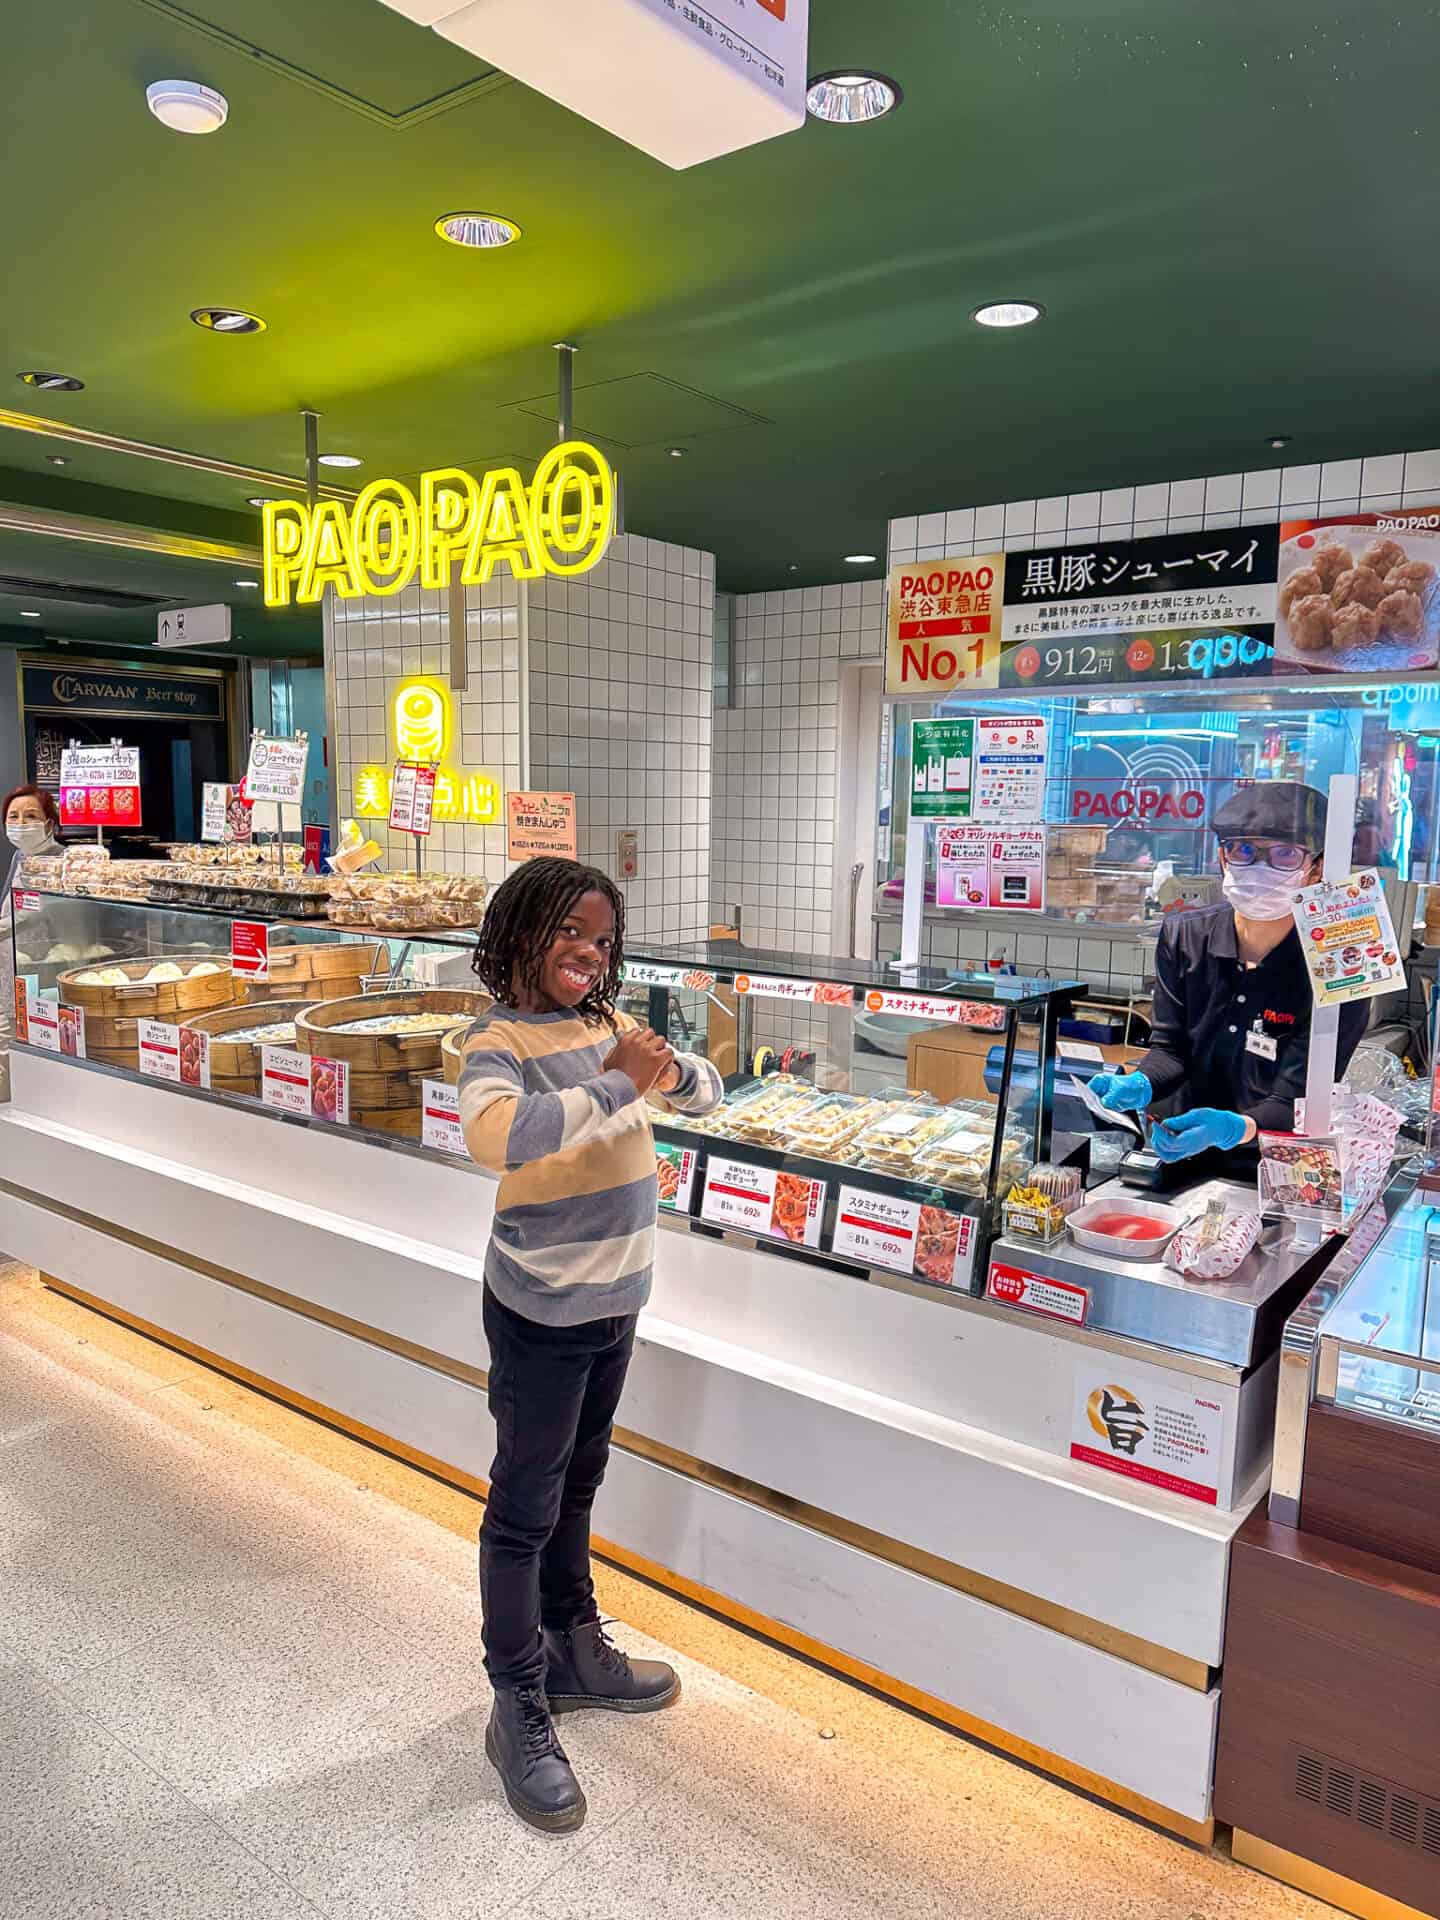 PAOPAO in Japan